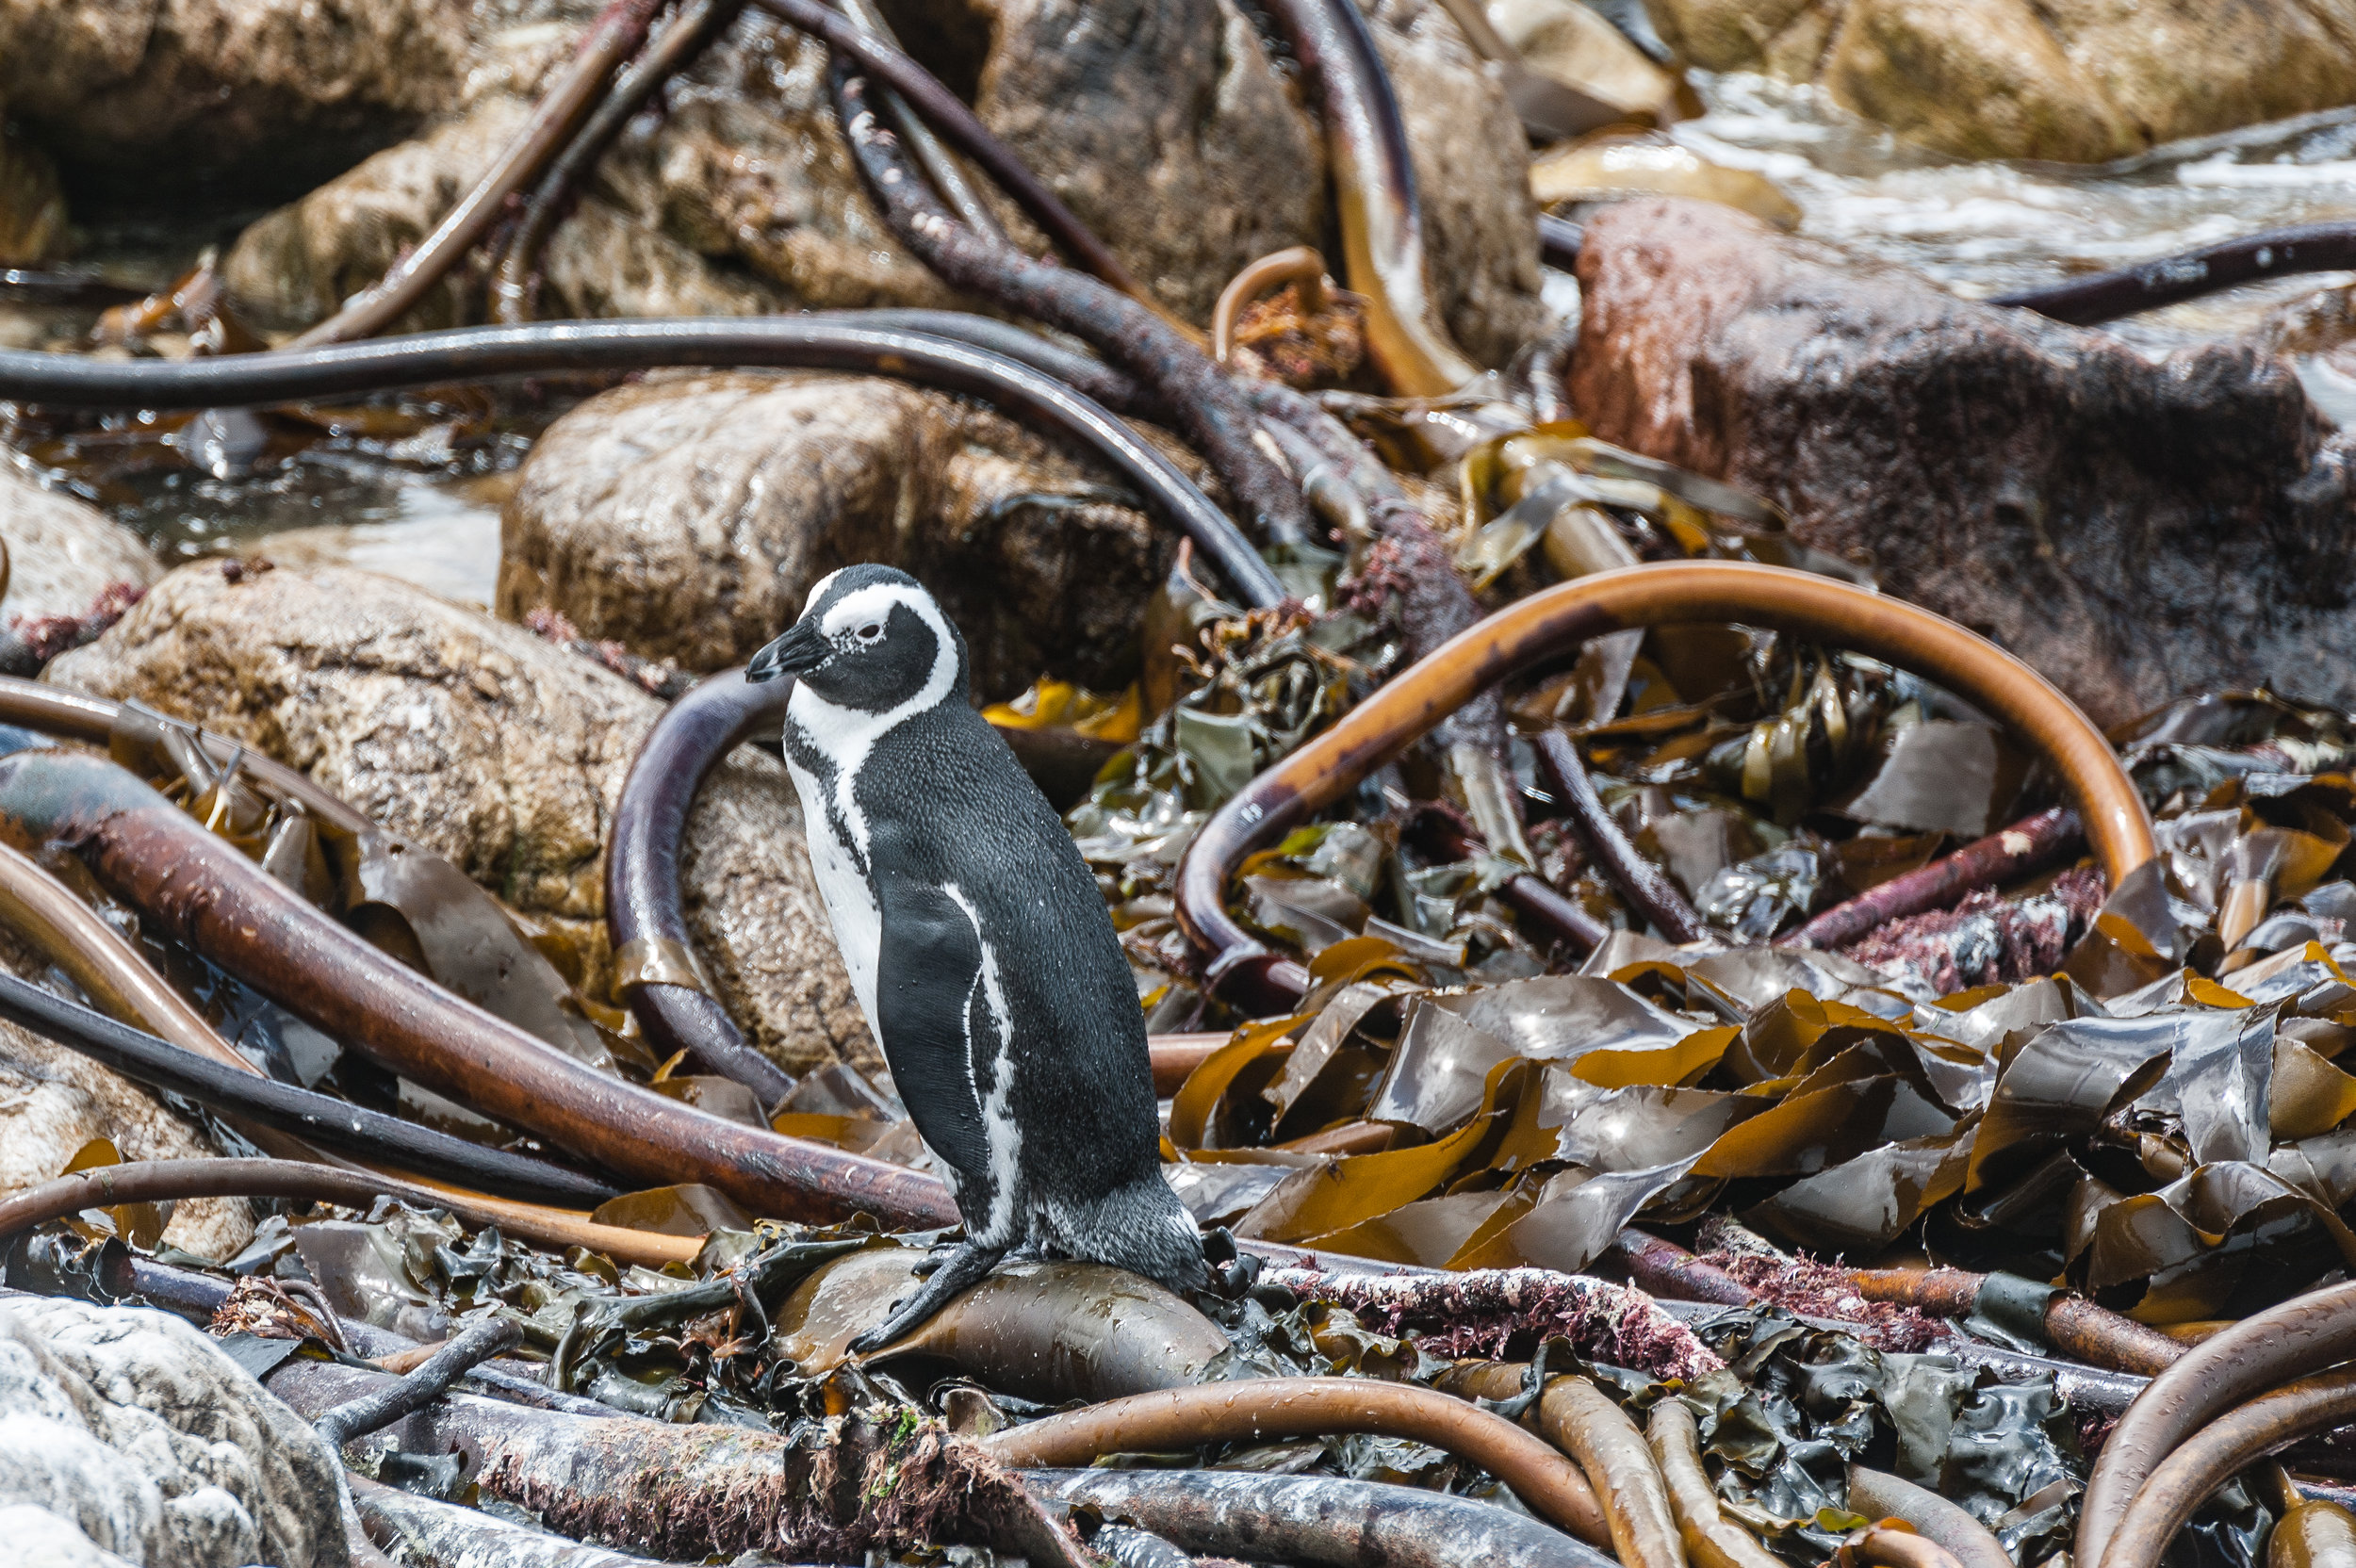 Penguin, South Africa